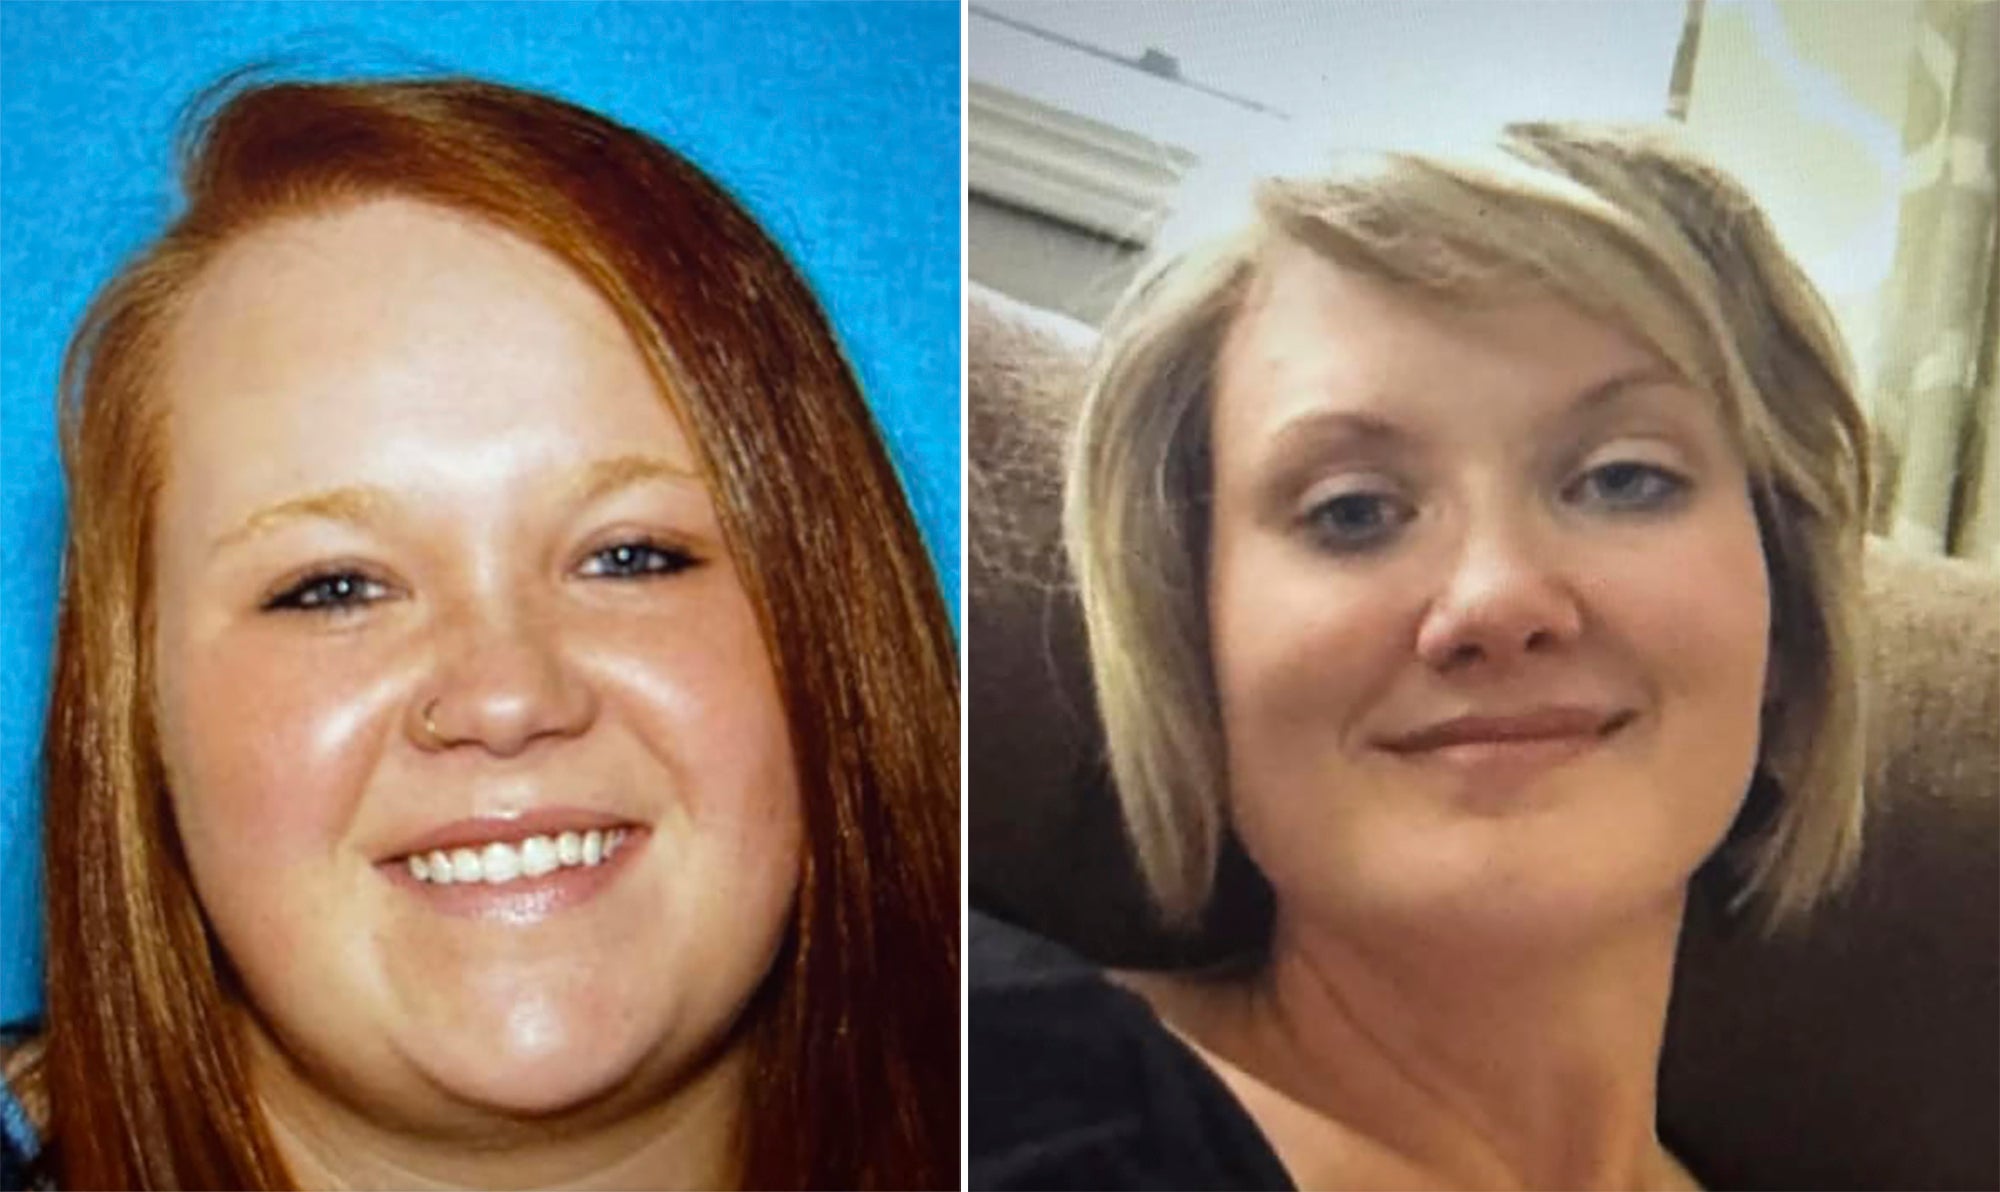 Veronica Butler, 27, and Jilian Kelley, 39, were on their way to pick up children when they disappeared